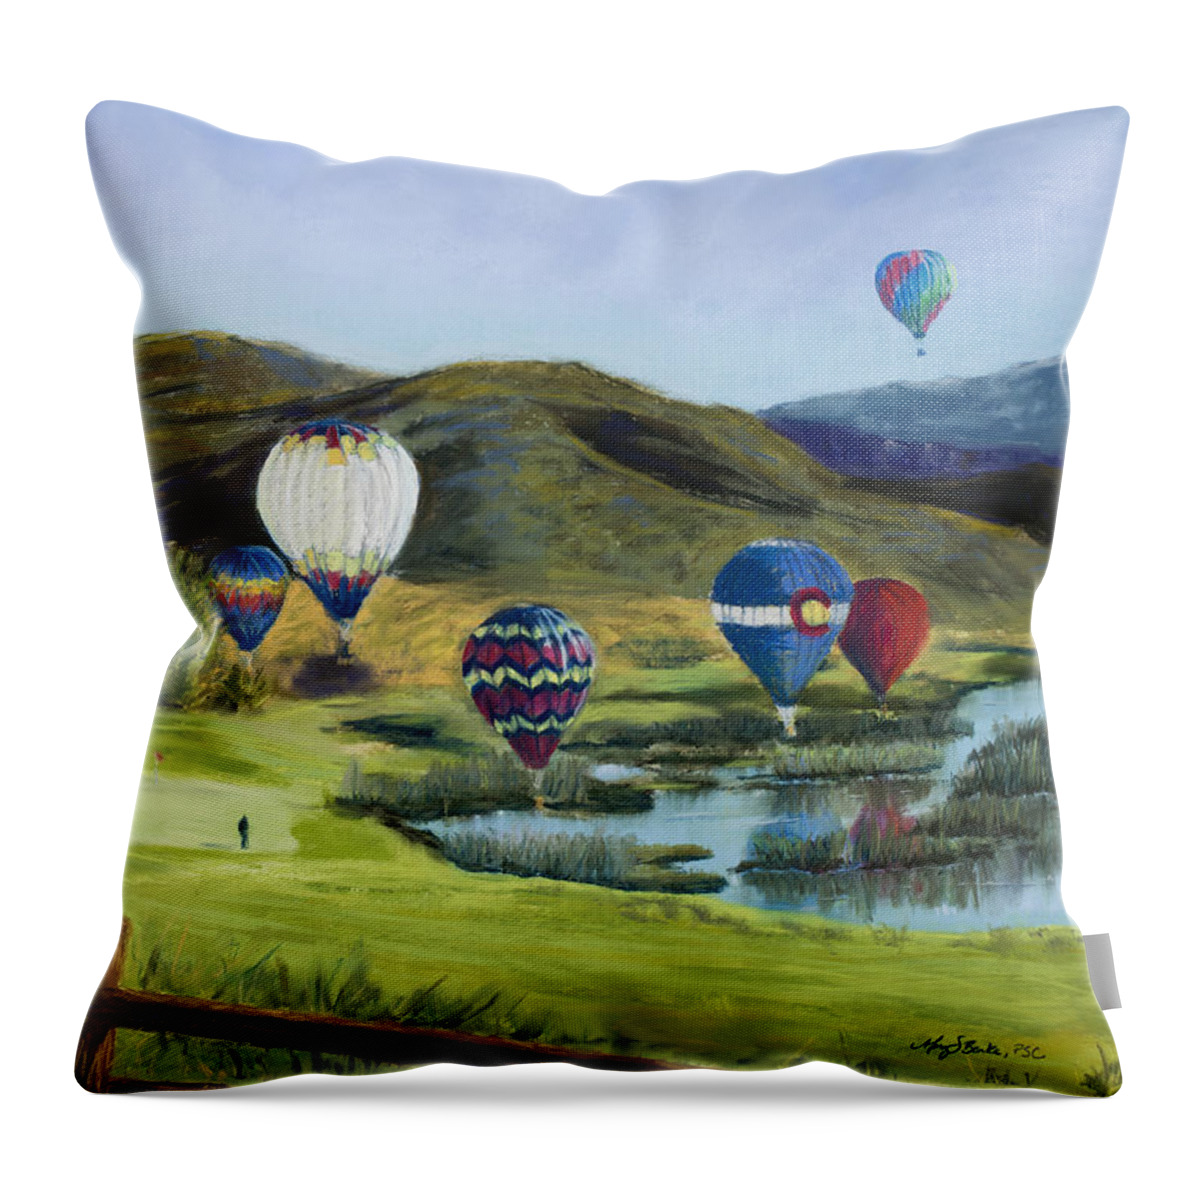 Hot Air Balloons Throw Pillow featuring the painting Soaring Over Colorado by Mary Benke